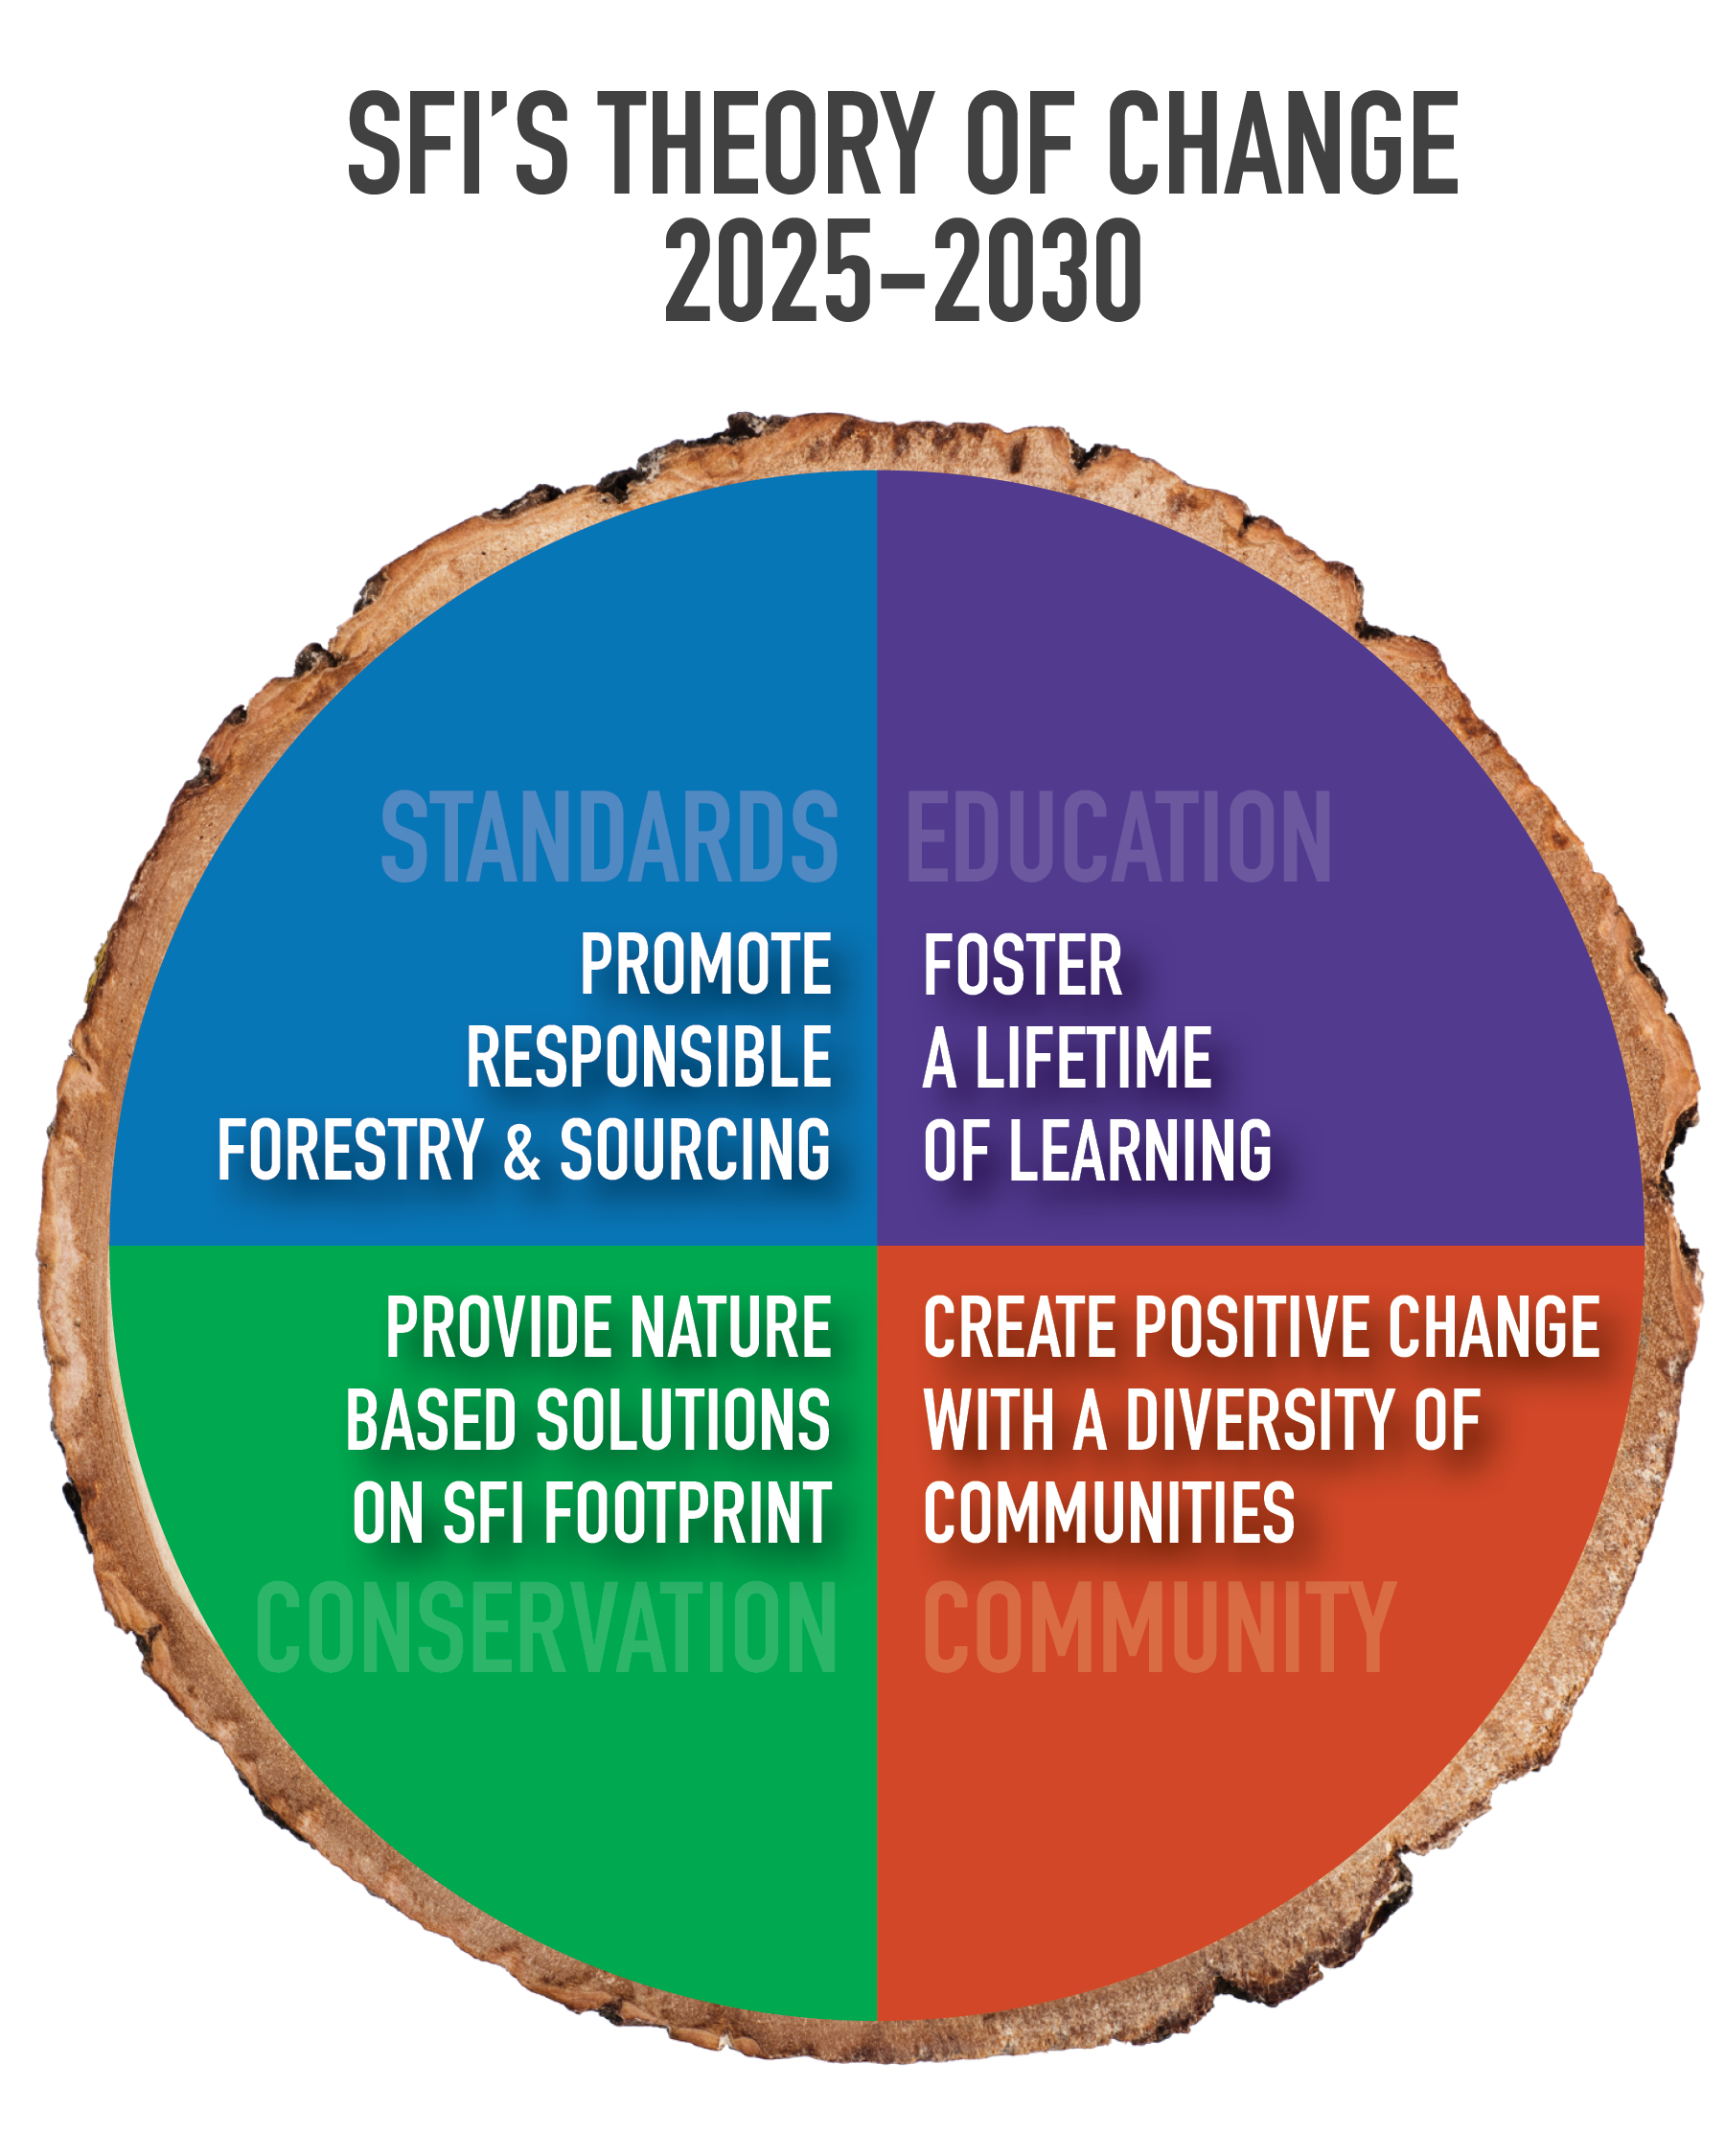 SFI_Theory_of_Change_Graphic_INNER_circle_Press_Release_v3